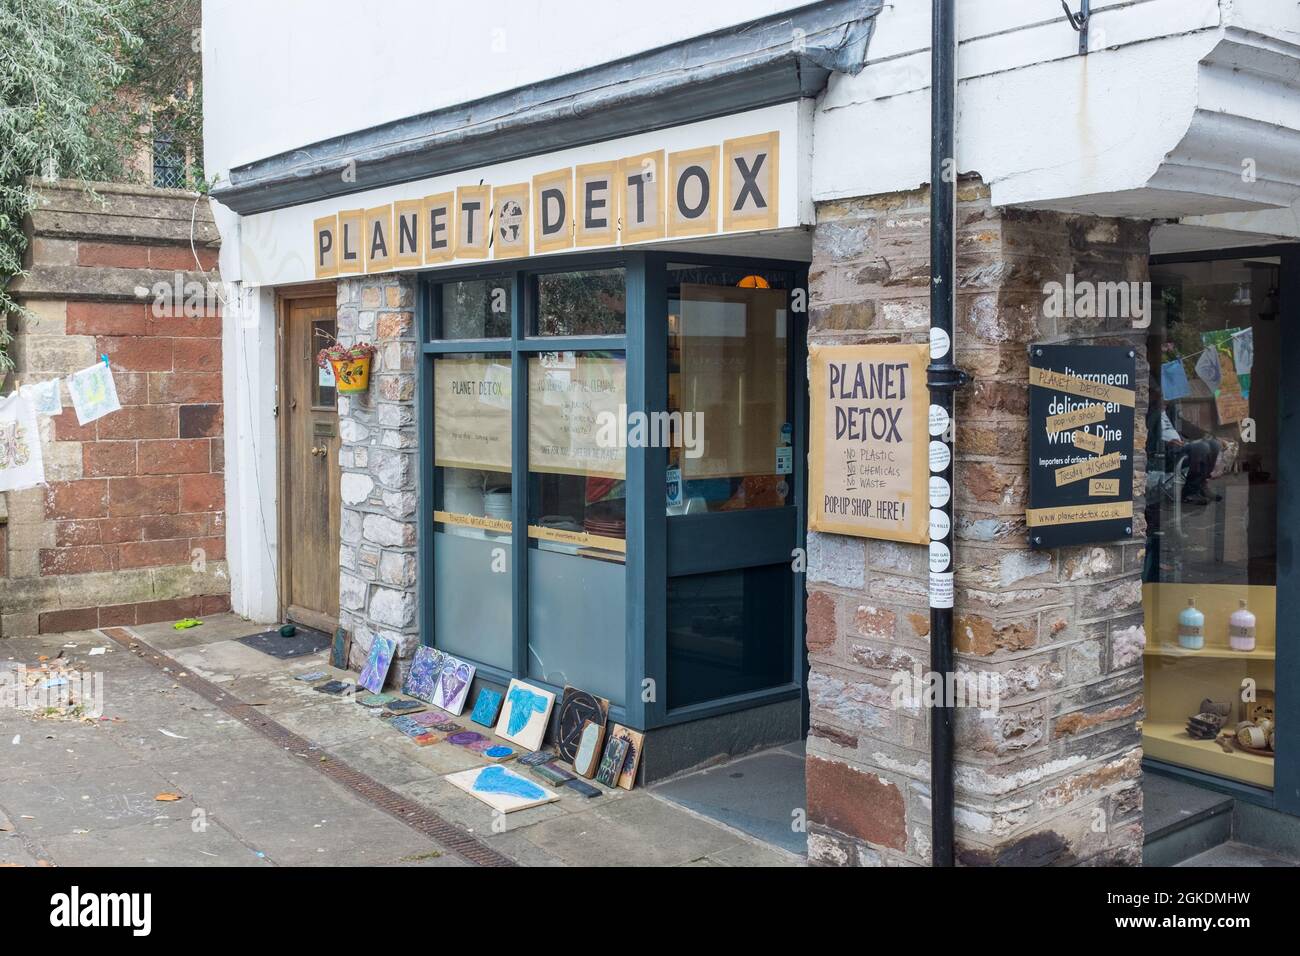 Planet Detox pop-up shop in Totnes, Devon selling ethical eco friendly products Stock Photo